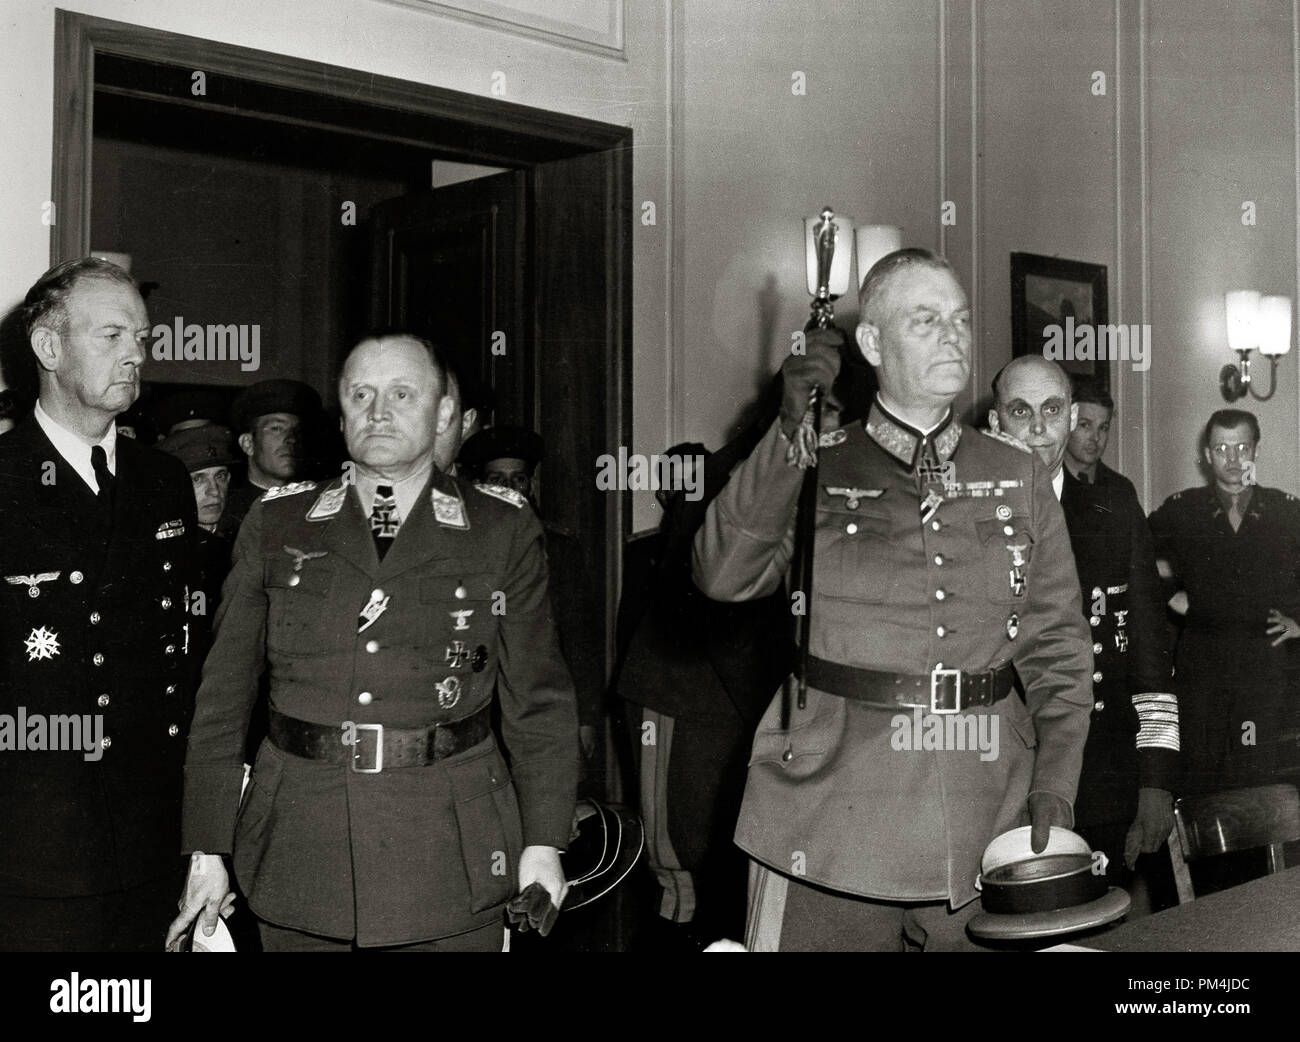 Colonel-General Paul Stumpff, second left, Luftwaffe commander; Field Marshal Wilhelm Keitel, German army commander, raising baton; and General Admiral Hans von Freideburg, rear, commander of the German navy; emerge after Germany's unconditional surrender was formally ratified in Berlin, May 9, 1945   File Reference # 1003 679THA Stock Photo